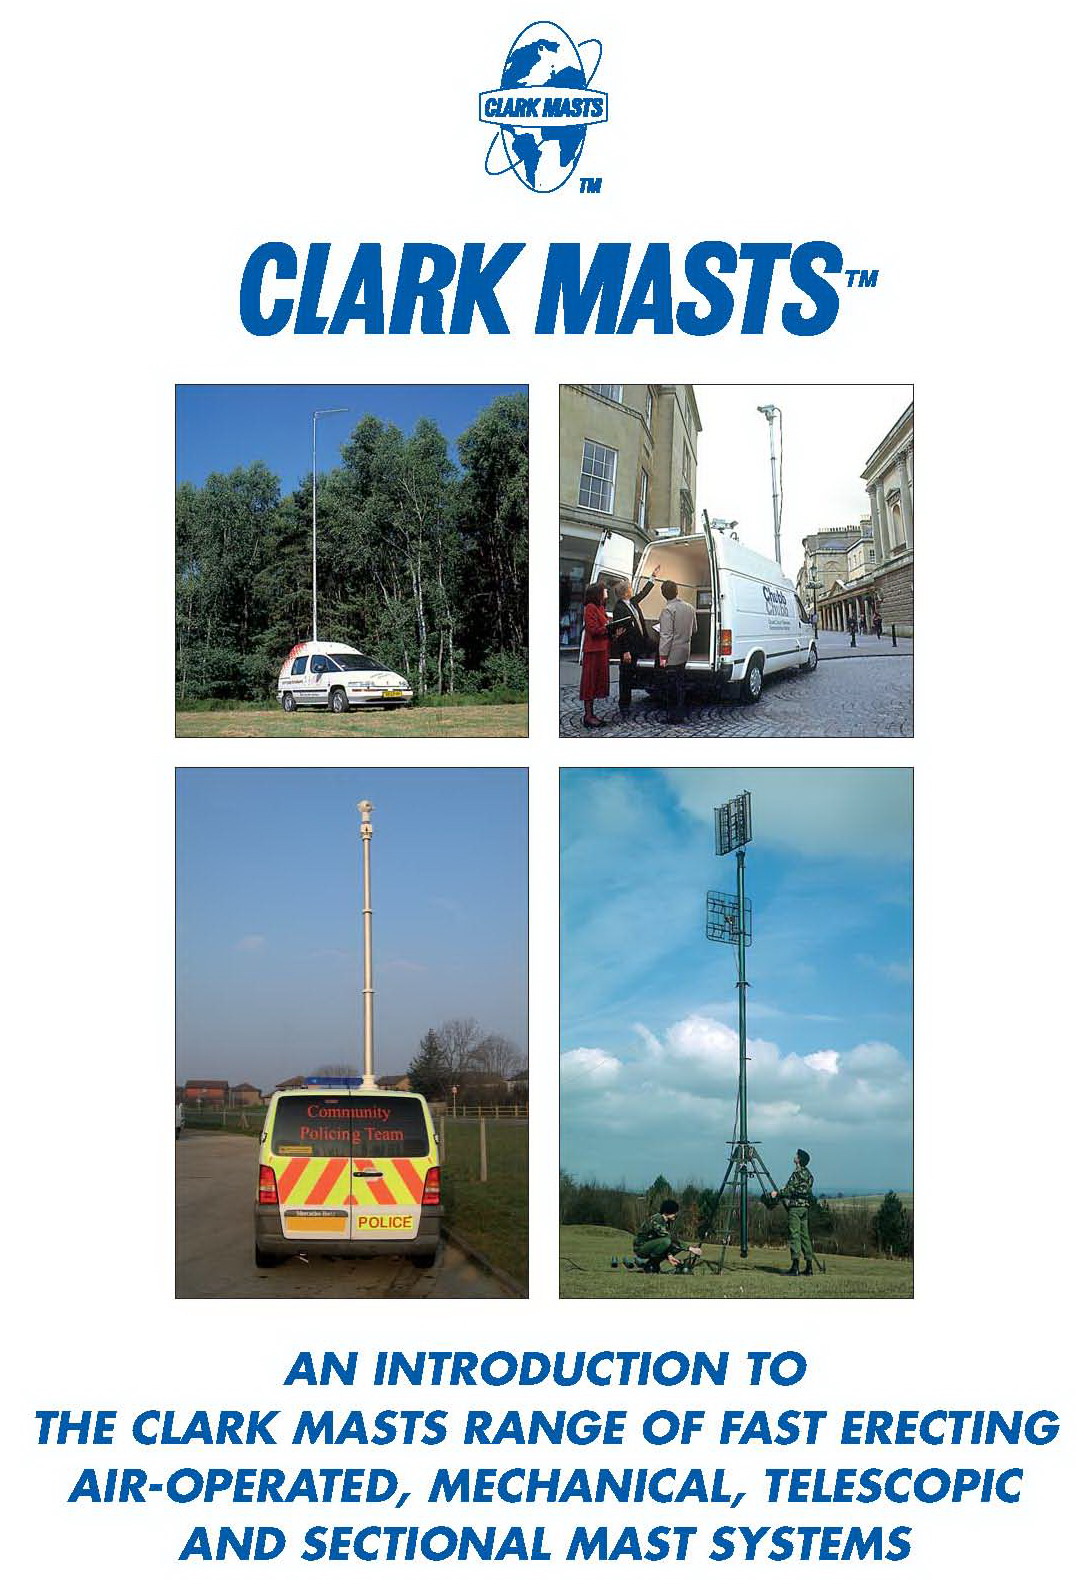 clark masts portable masts in service